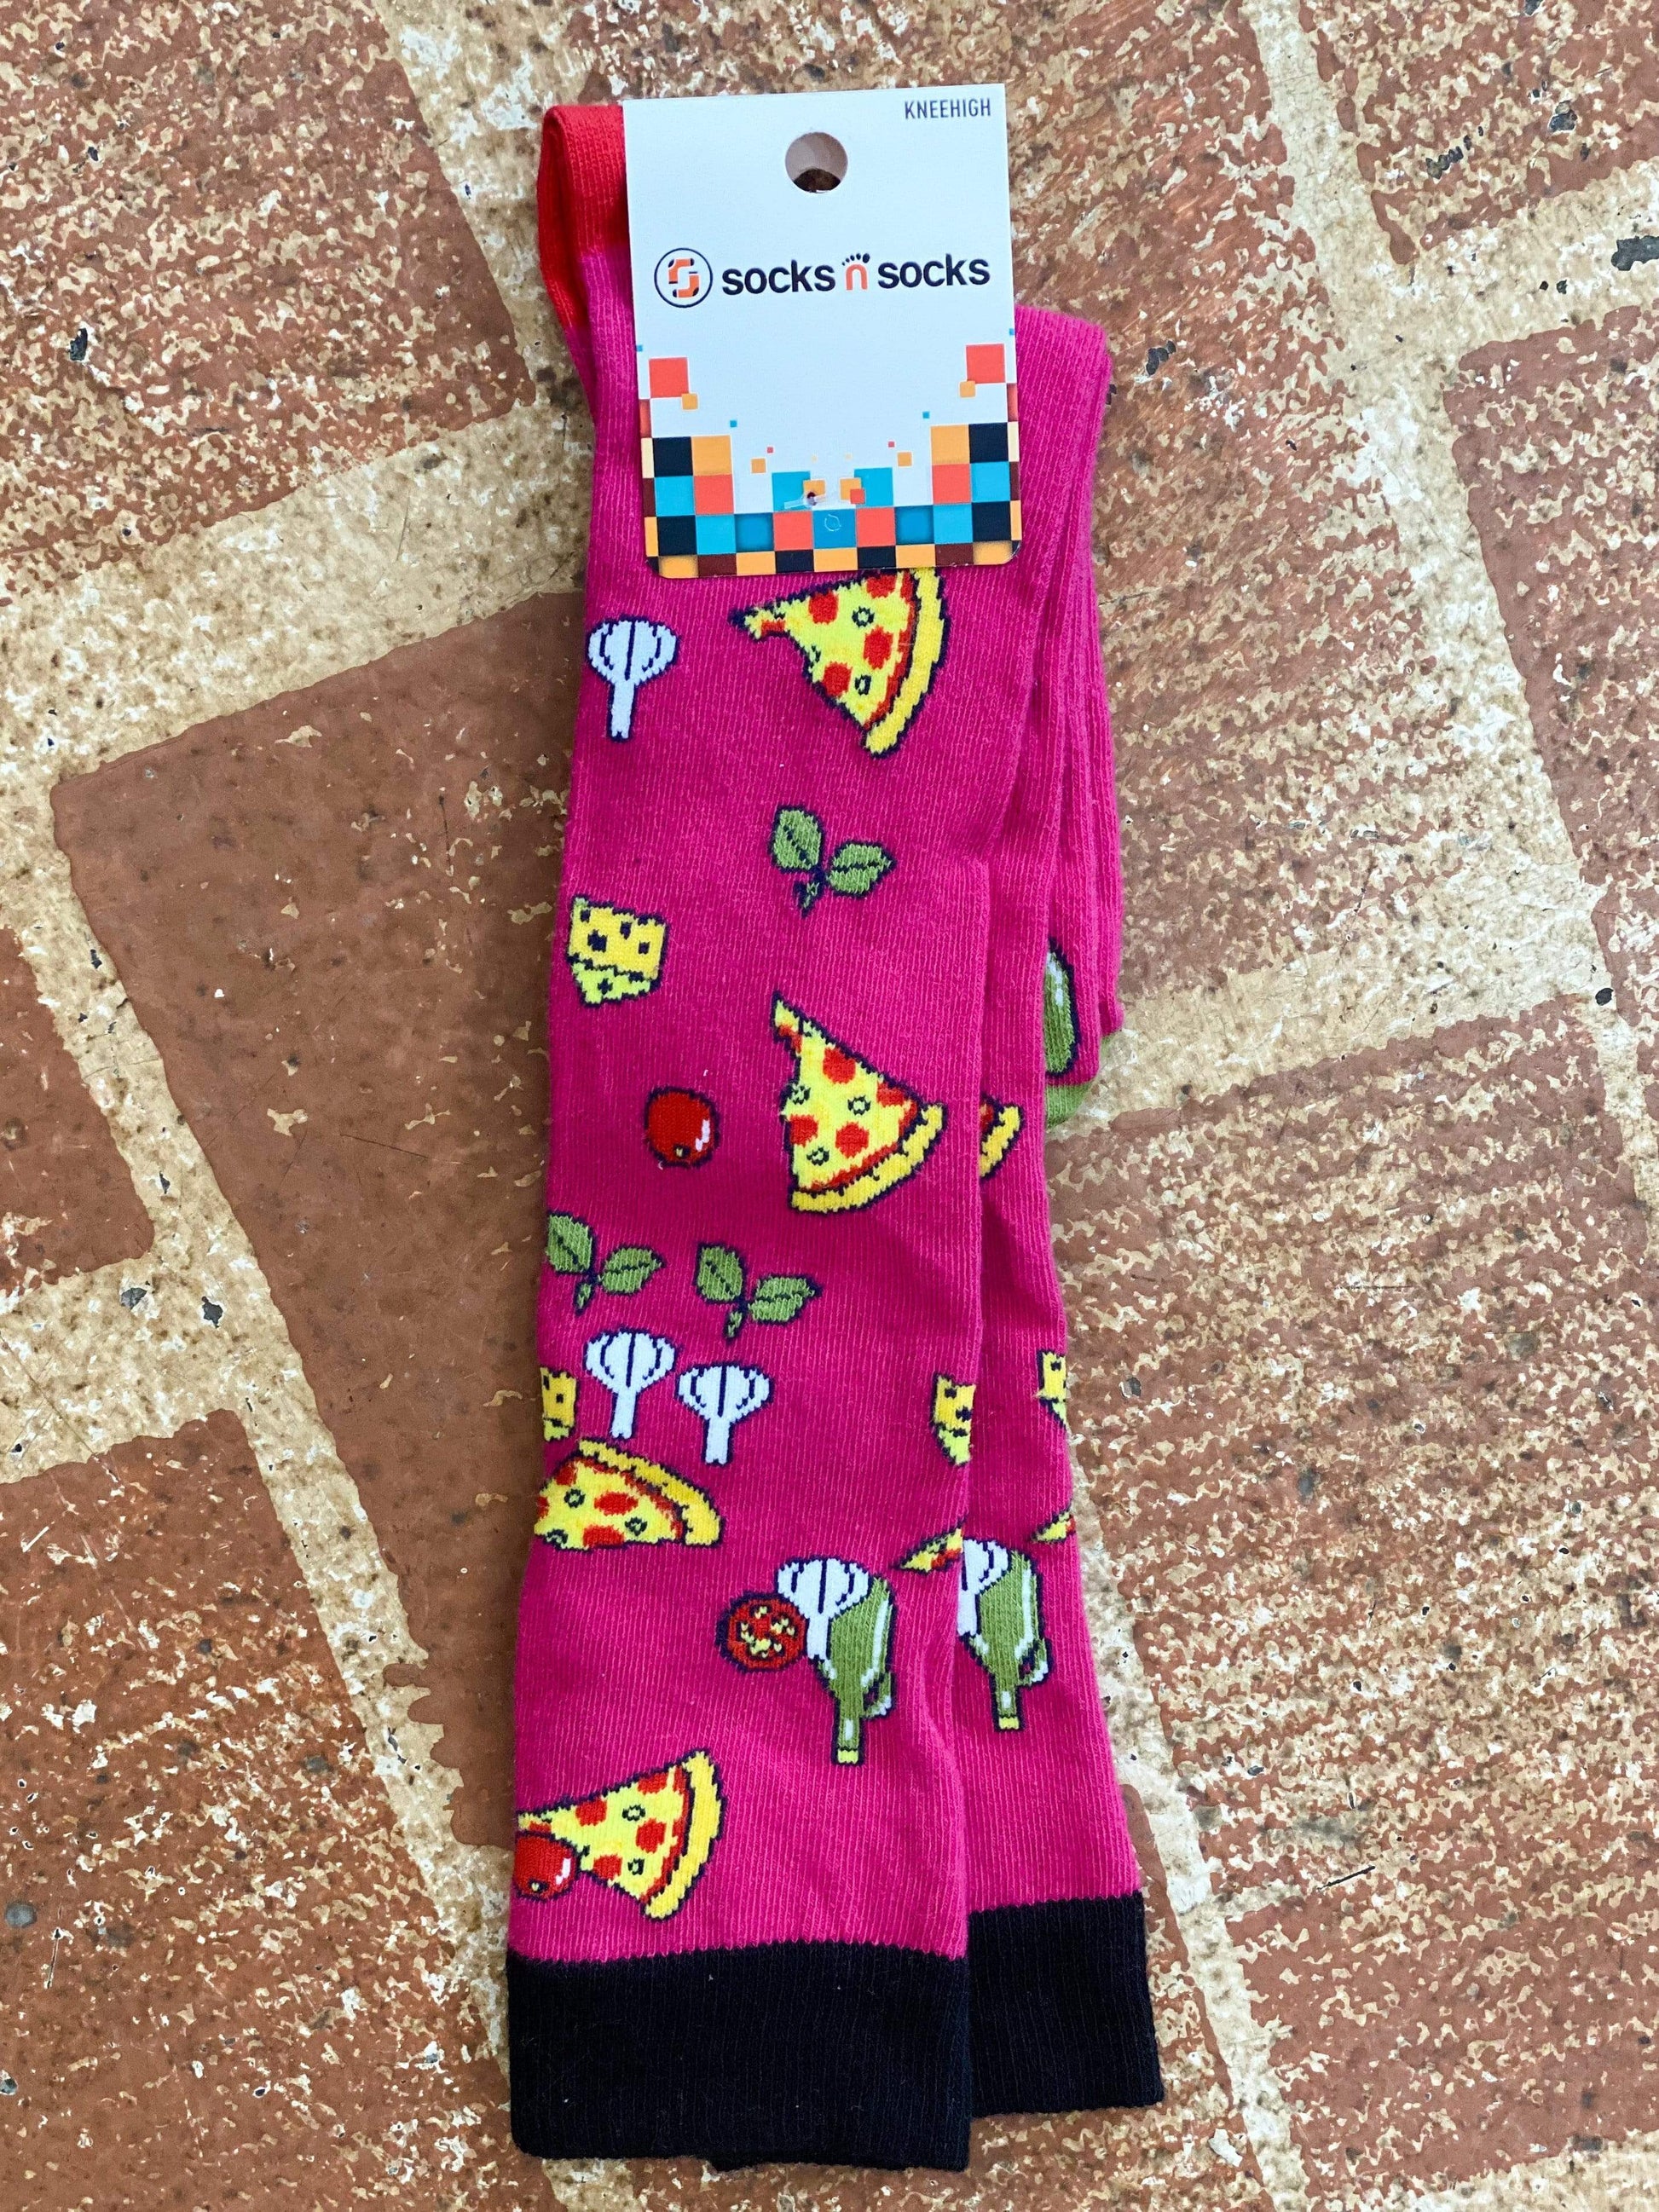 Other Goodies Fun & Funky Women's Knee High Socks Pizza Chef